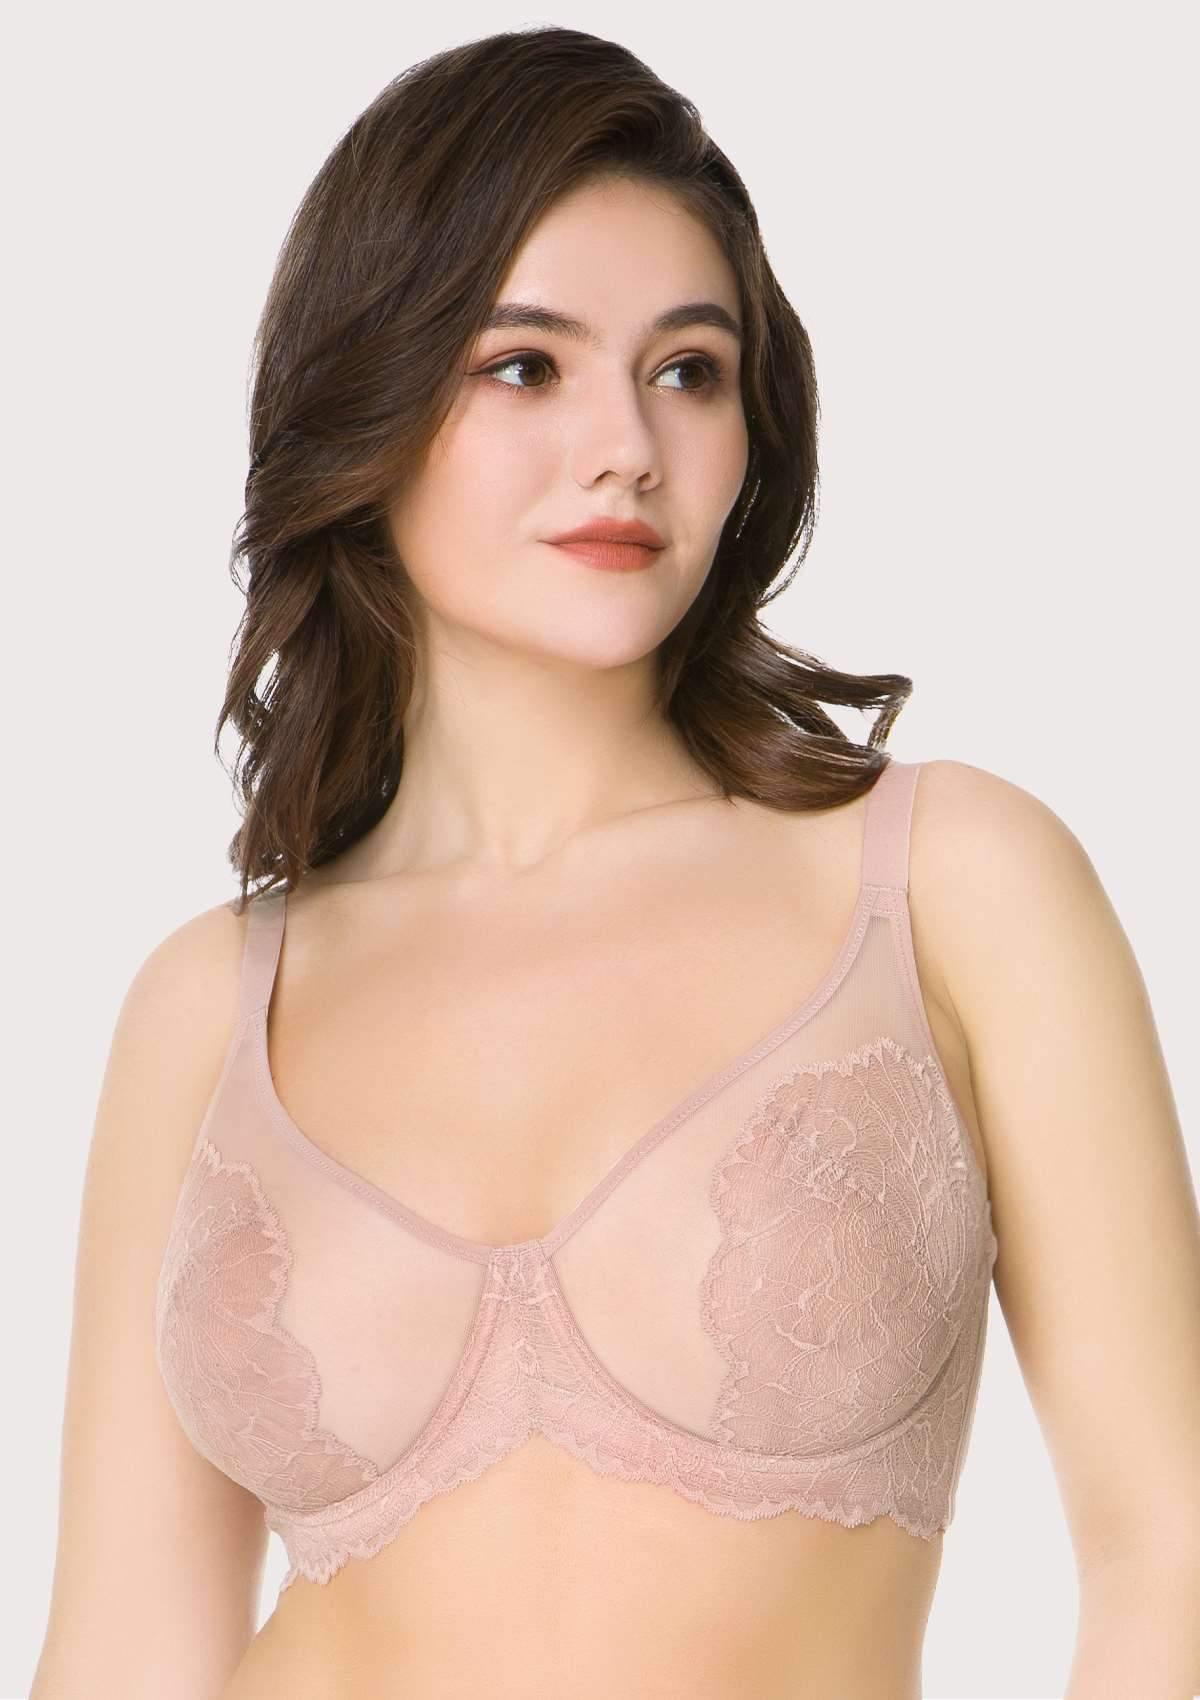 HSIA Blossom Lace Bra And Panties Set: Best Bra For Large Busts - Dark Pink / 34 / G